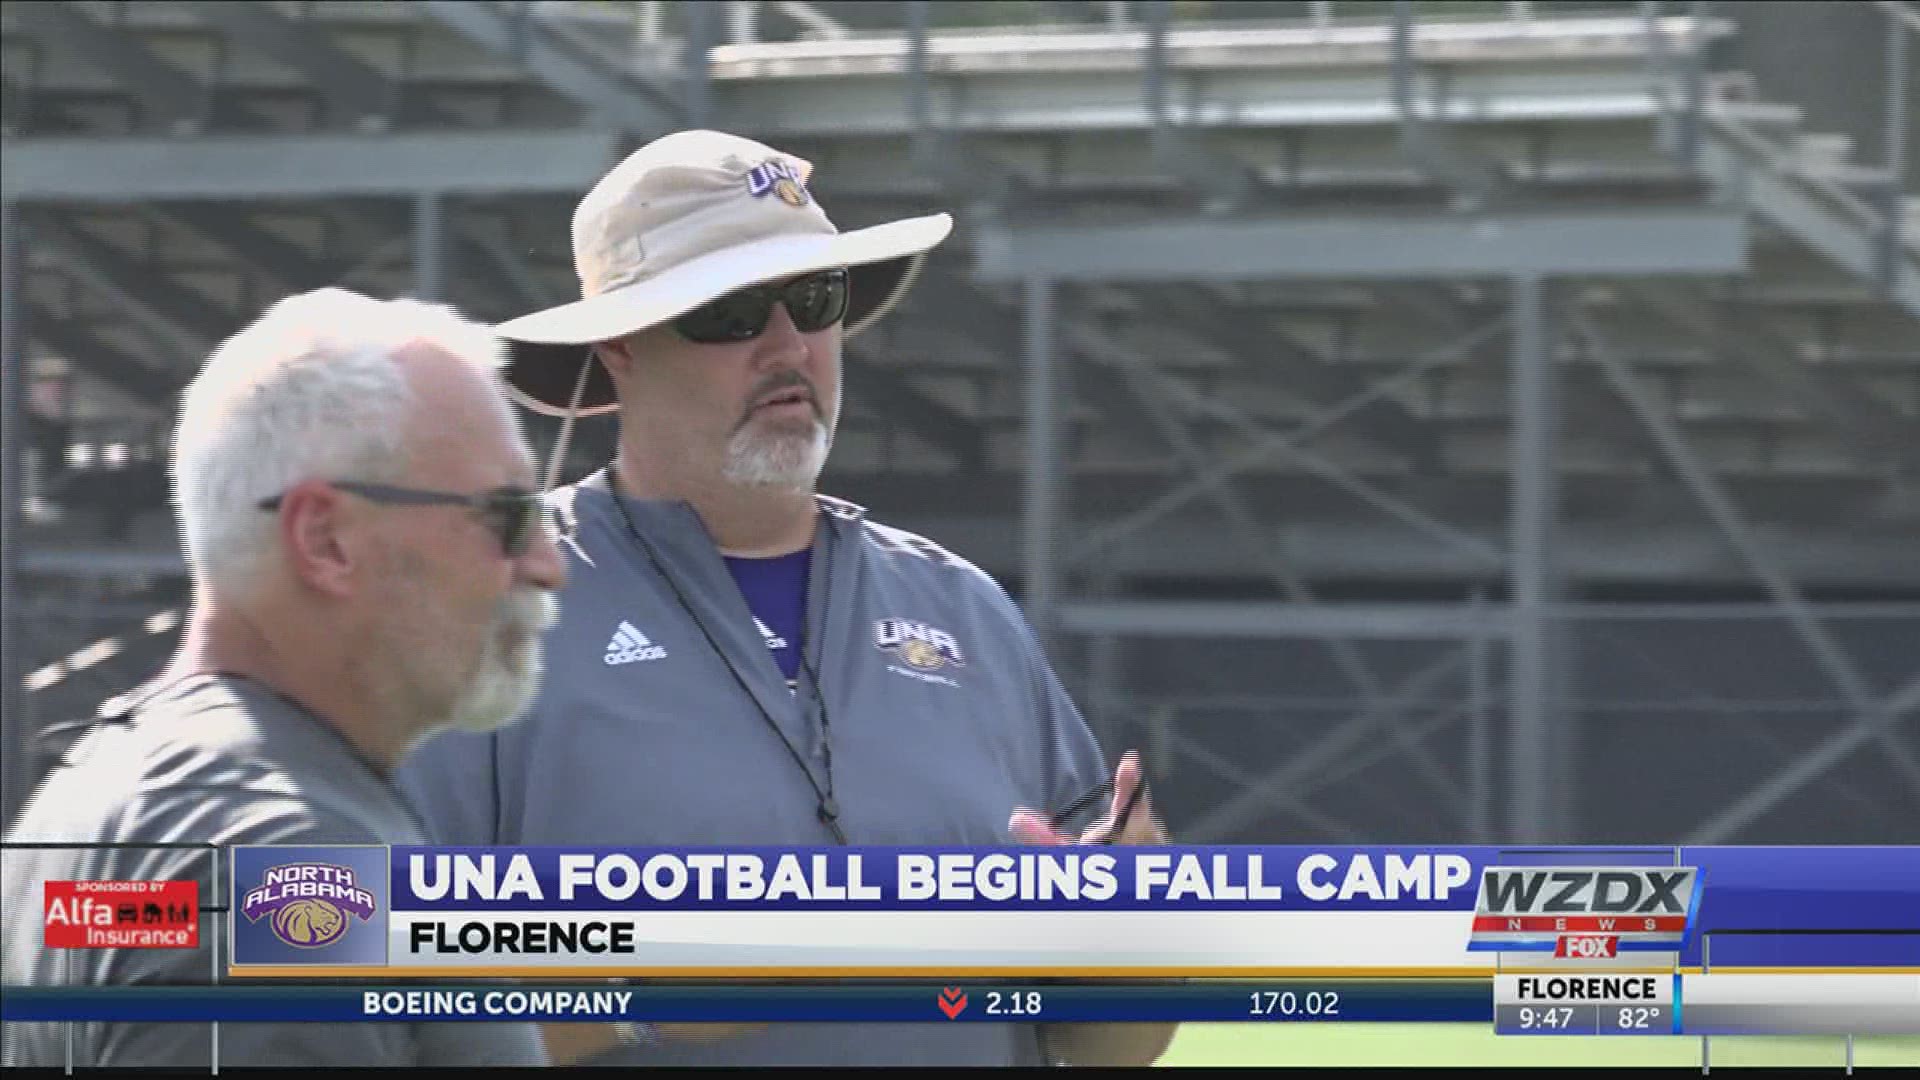 Chris Willis and the UNA Lions football team kicked off their 2020 fall camp with a practice on Friday.